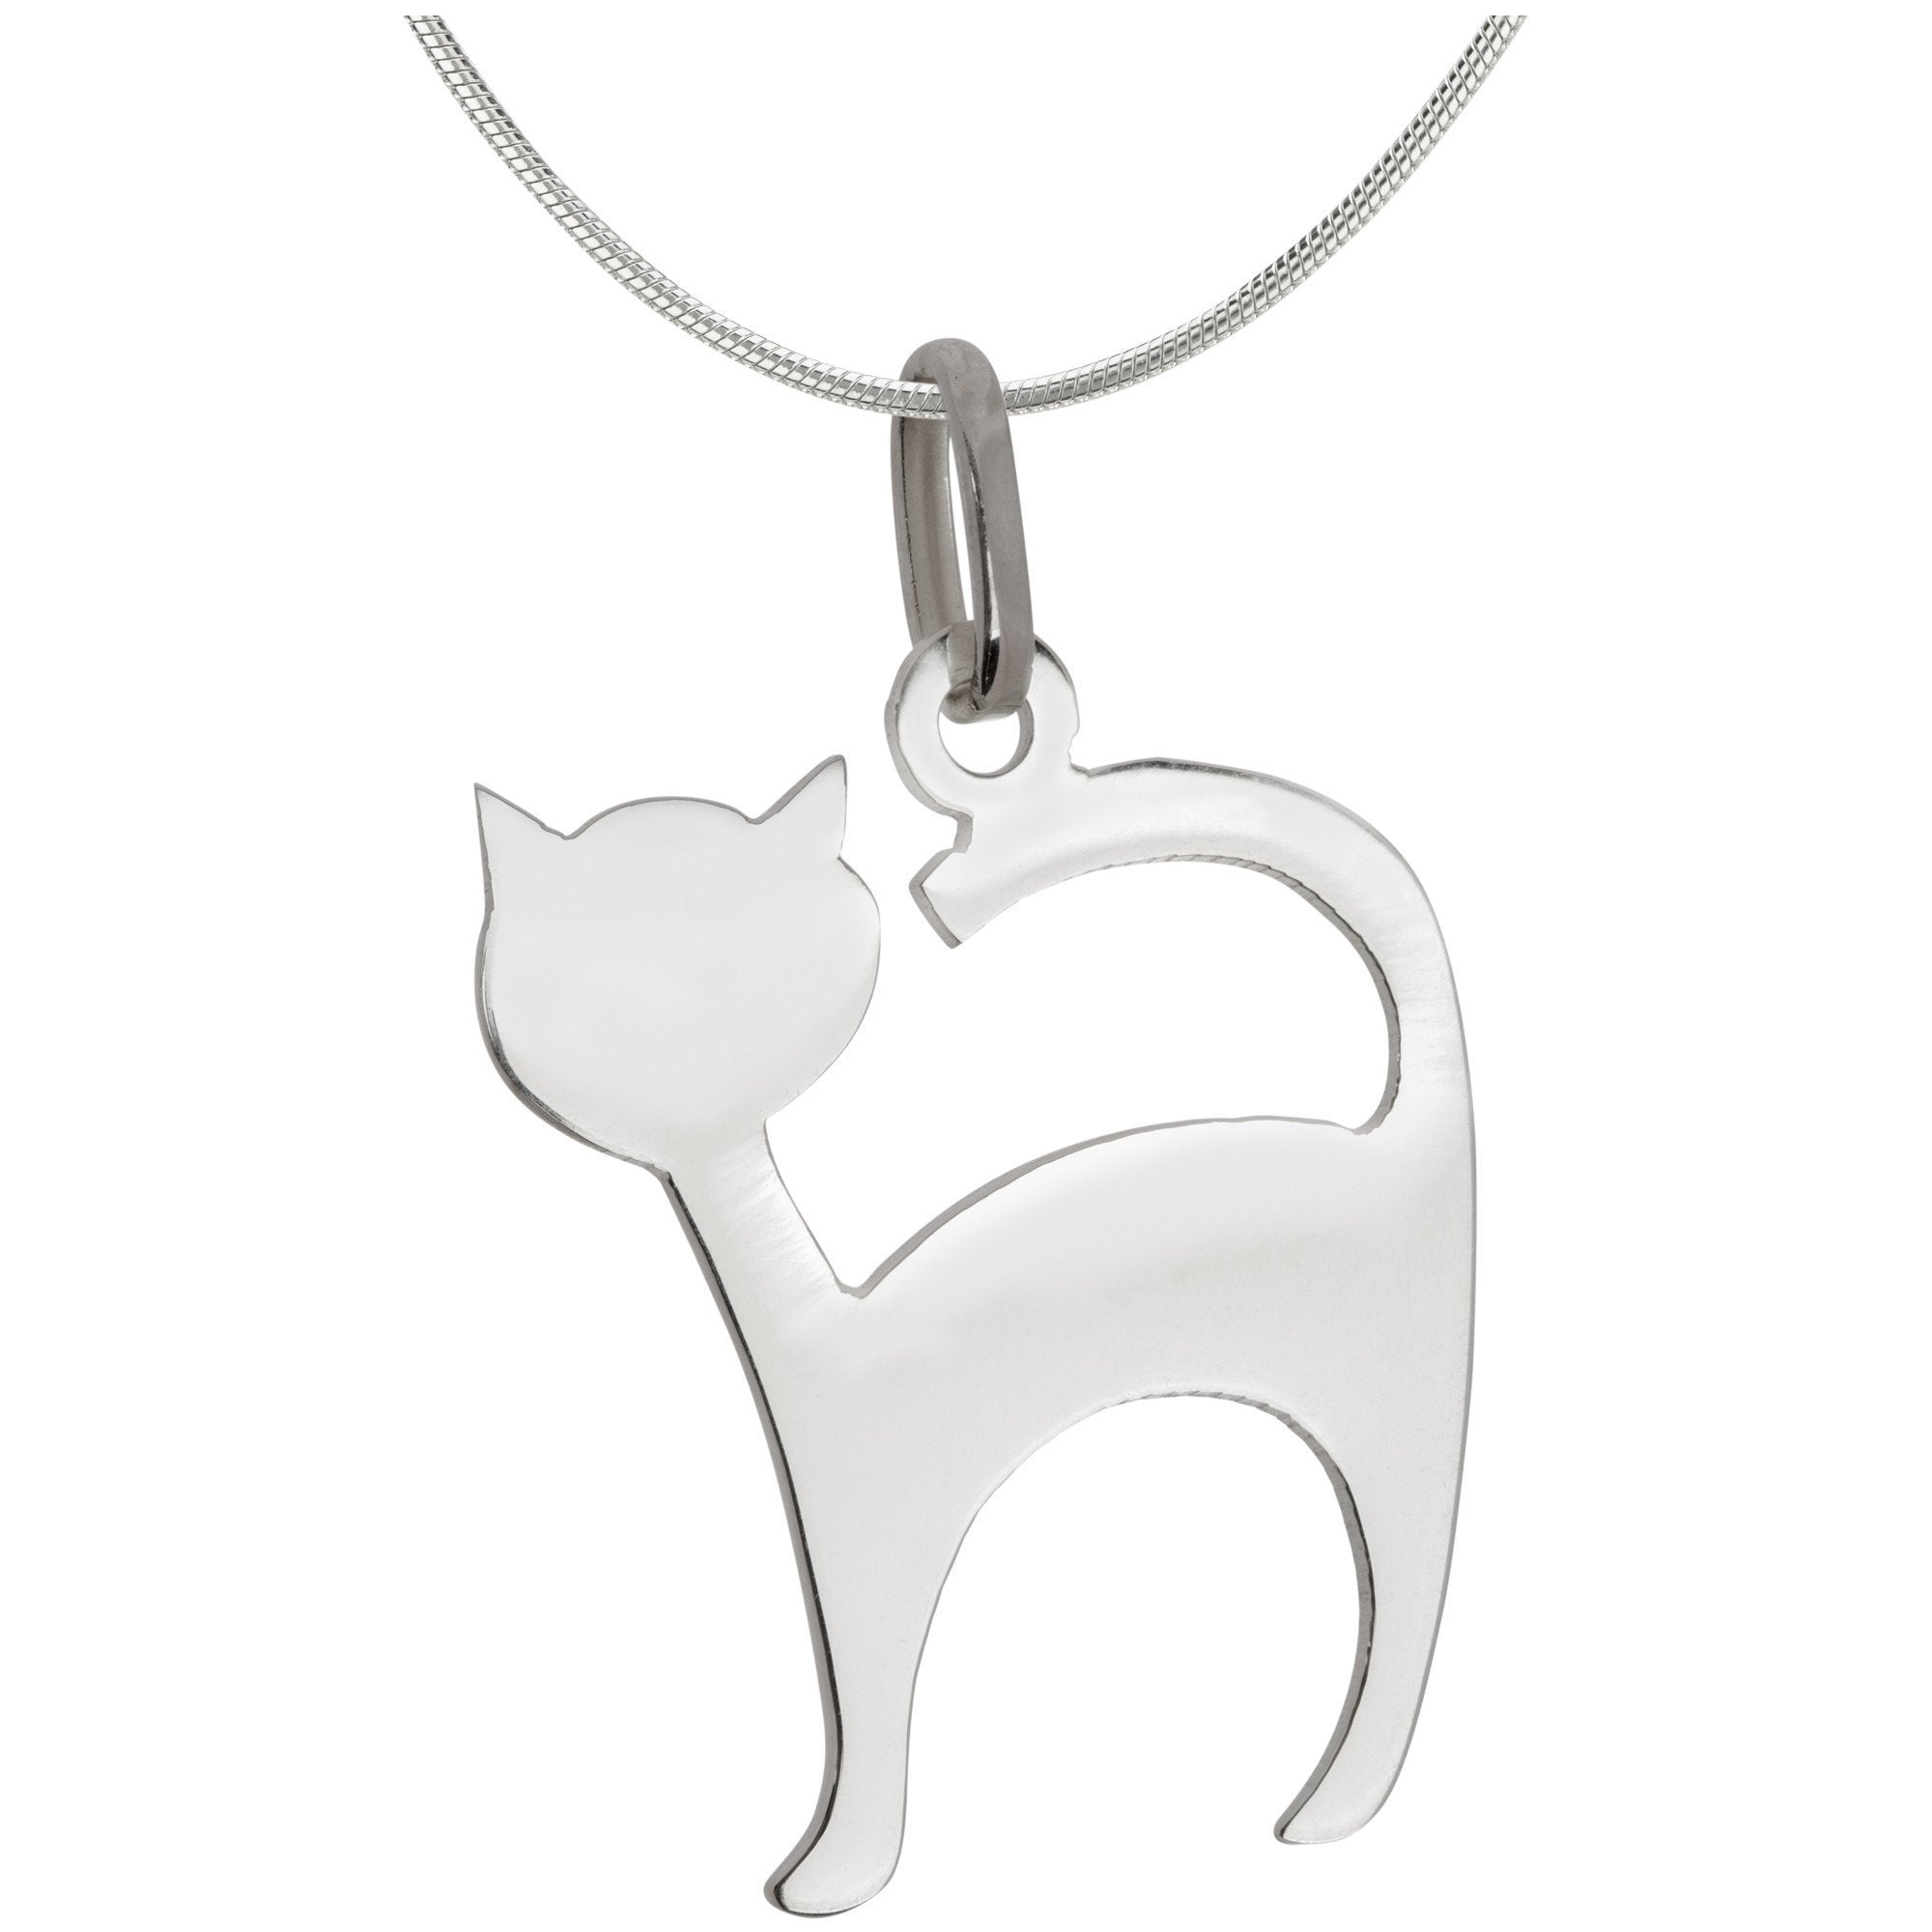 Cat Sterling Silhouette Necklace - With Snake Chain